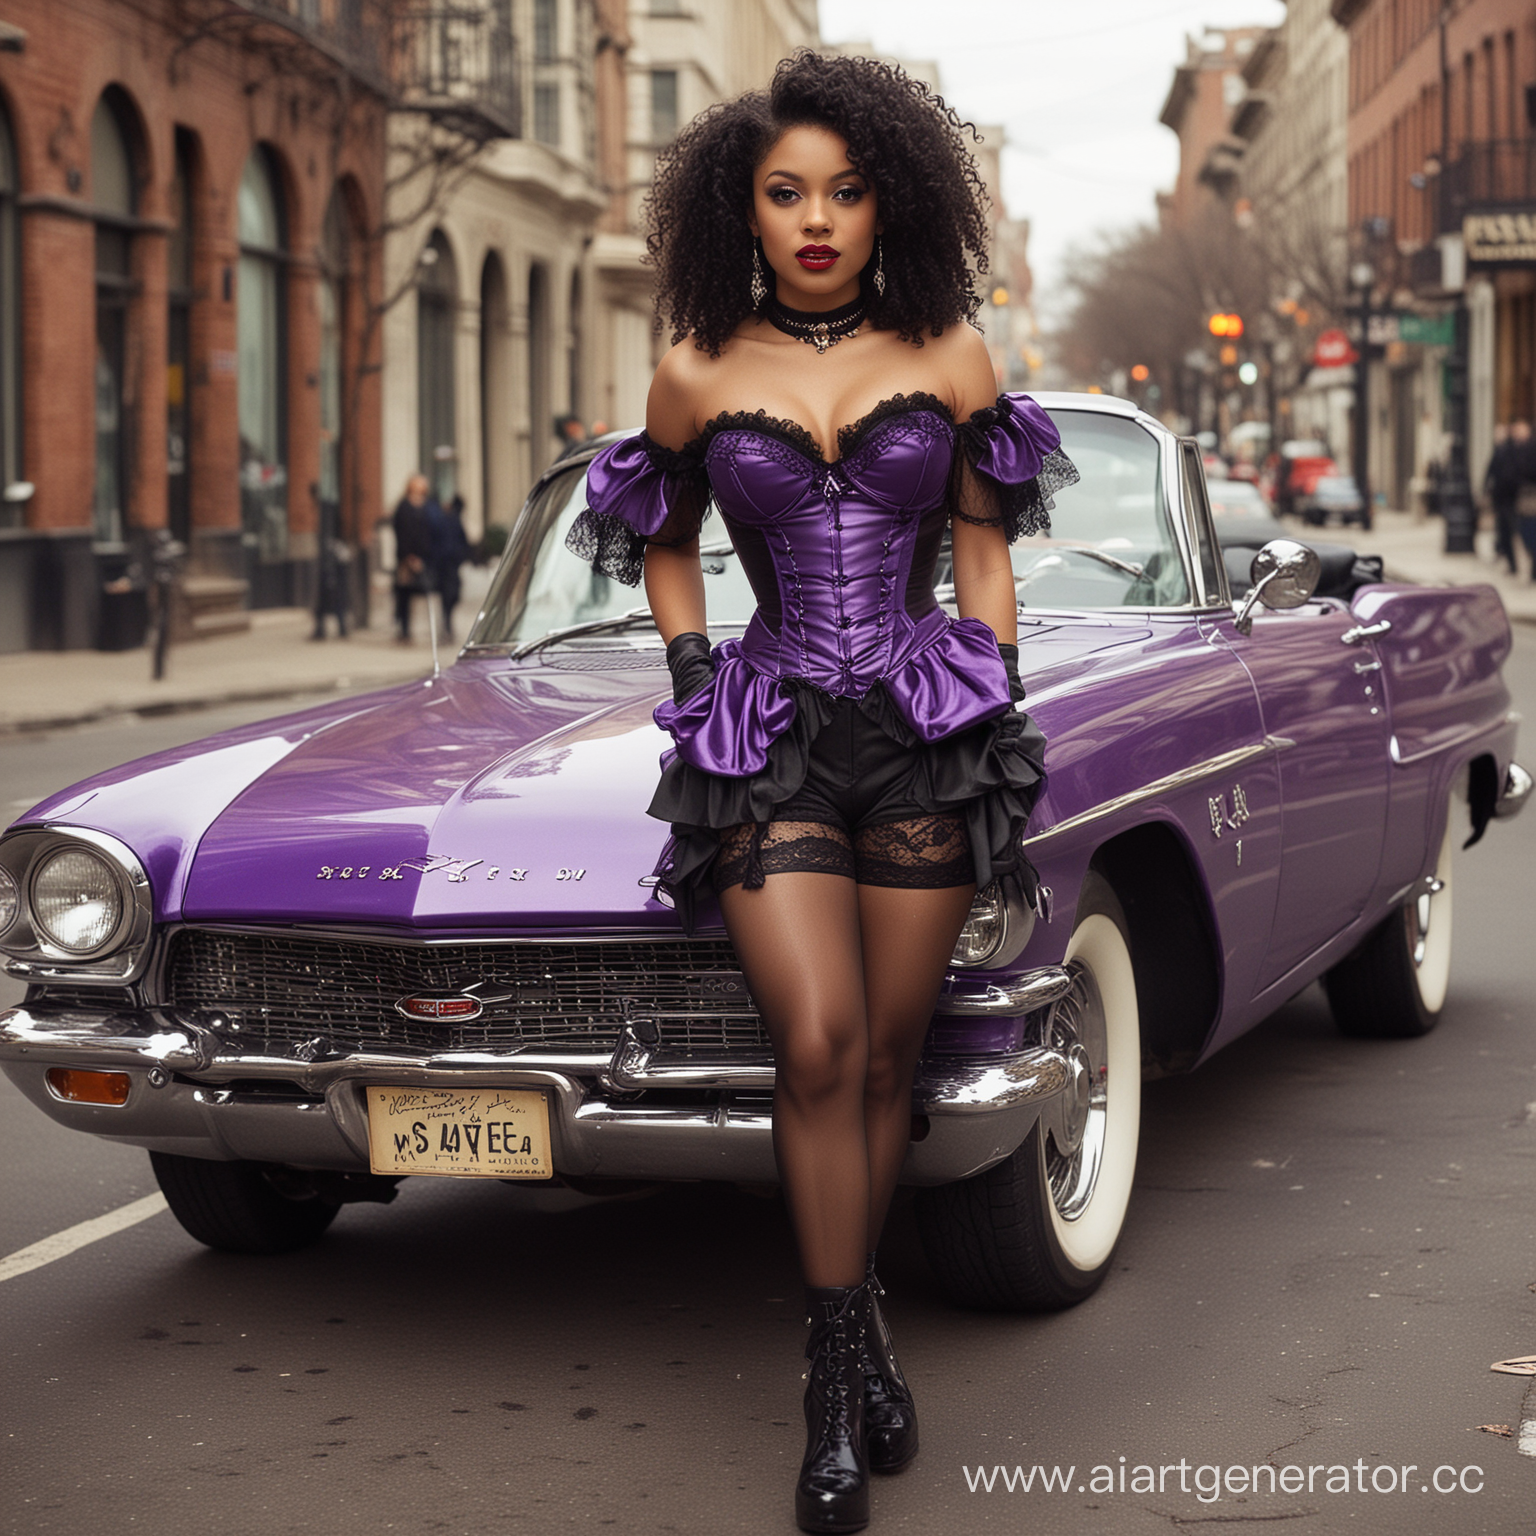 A very beautiful slender long-legged American, mulatto, mestizo, student age, short strongly curly lush black hair, Afro hairstyle, fresh and beauty-enhancing defiant Gothic makeup, dark skin of the shade of "coffee with milk" and dark eyes.she is wearing a black and purple lace silk corset with garters and fishnet stockings, purple high-heeled boots above the knee on her feet, purple latex gloves on her hands,her chest is 2 sizes upturned, her face is round with regular features, . It stands on a New York street leaning on an American classic car of the 70s of the 20th century
Pin-up style, vintage style,country style,hippie style,American style,style of the 70s of the 20th century.
femme fatale,vamp woman,pin-up of the century:,ironic,able to present herself, glamorous,passionate,bisexual, promiscuous, lustful, promiscuous, slutty, pornographic, whore, prim, cocky, sexy, unmarried, single, mistress
